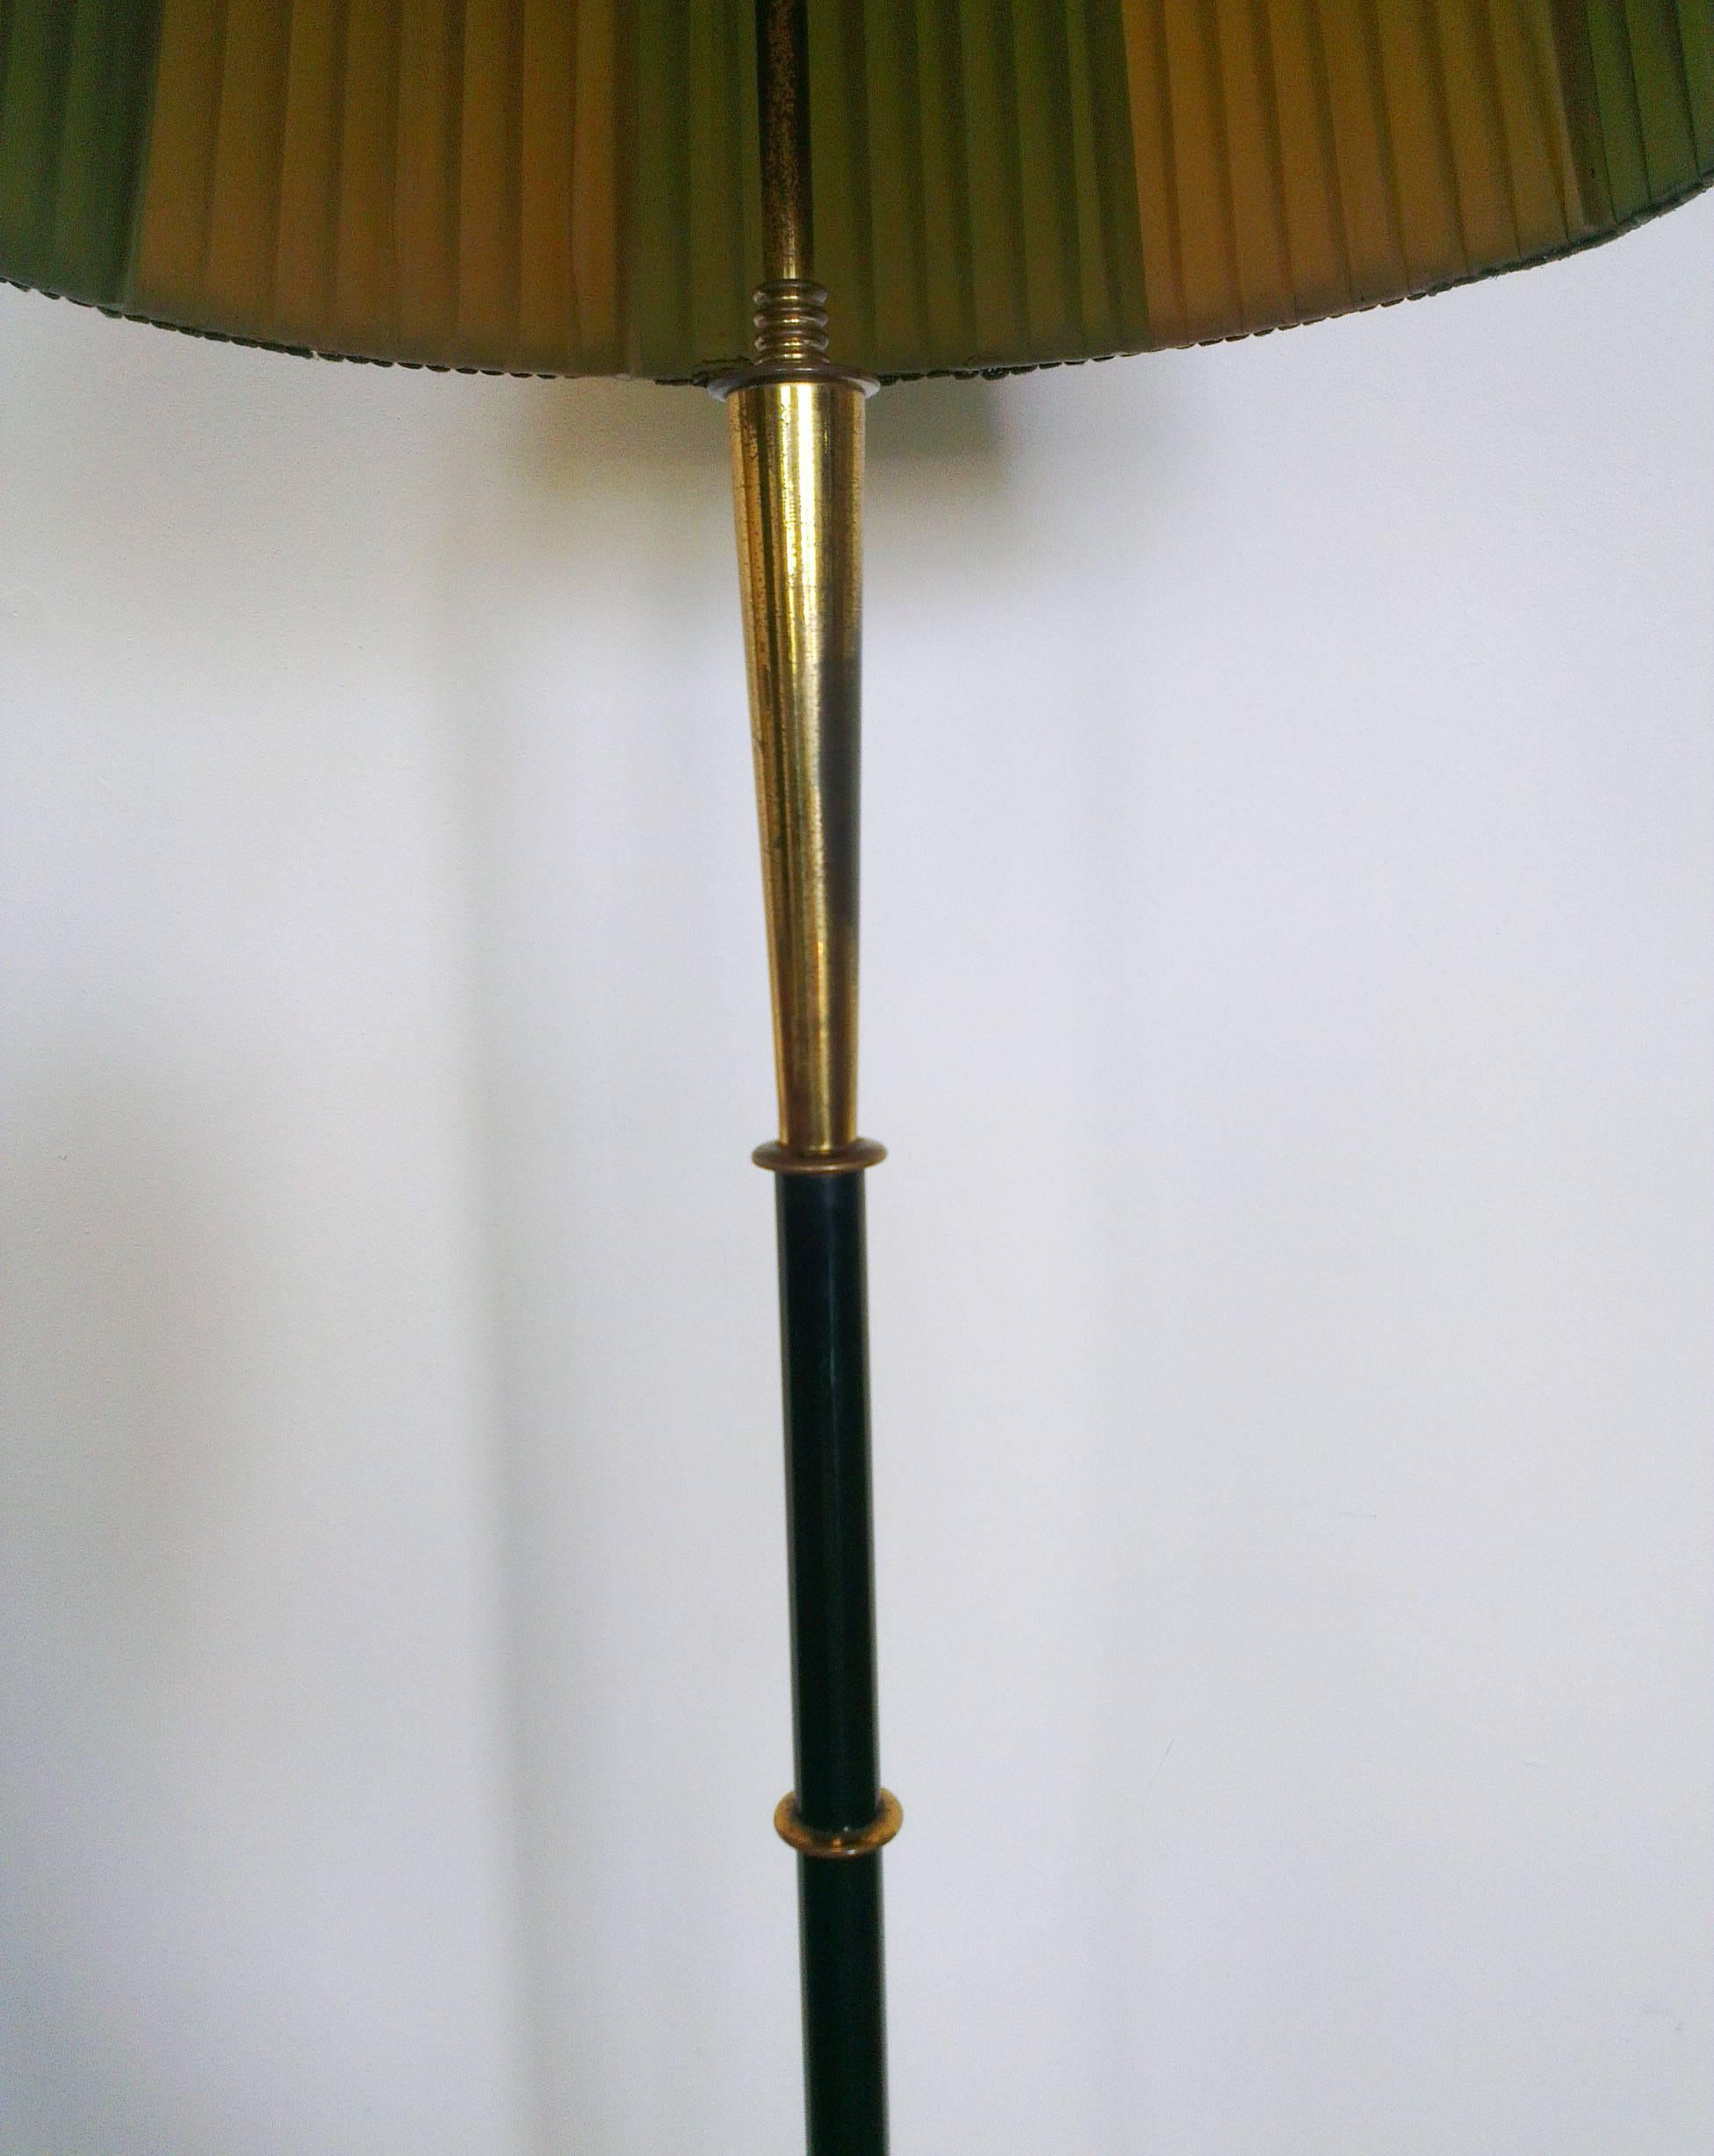 Beautiful floor lamp with bras stem black lacquered and bamboo shaped, five little brass arms are the base of the lamp, the diffuser is a silk fabric shadow.
Very nice model manufactured in Italy in the 1950s.